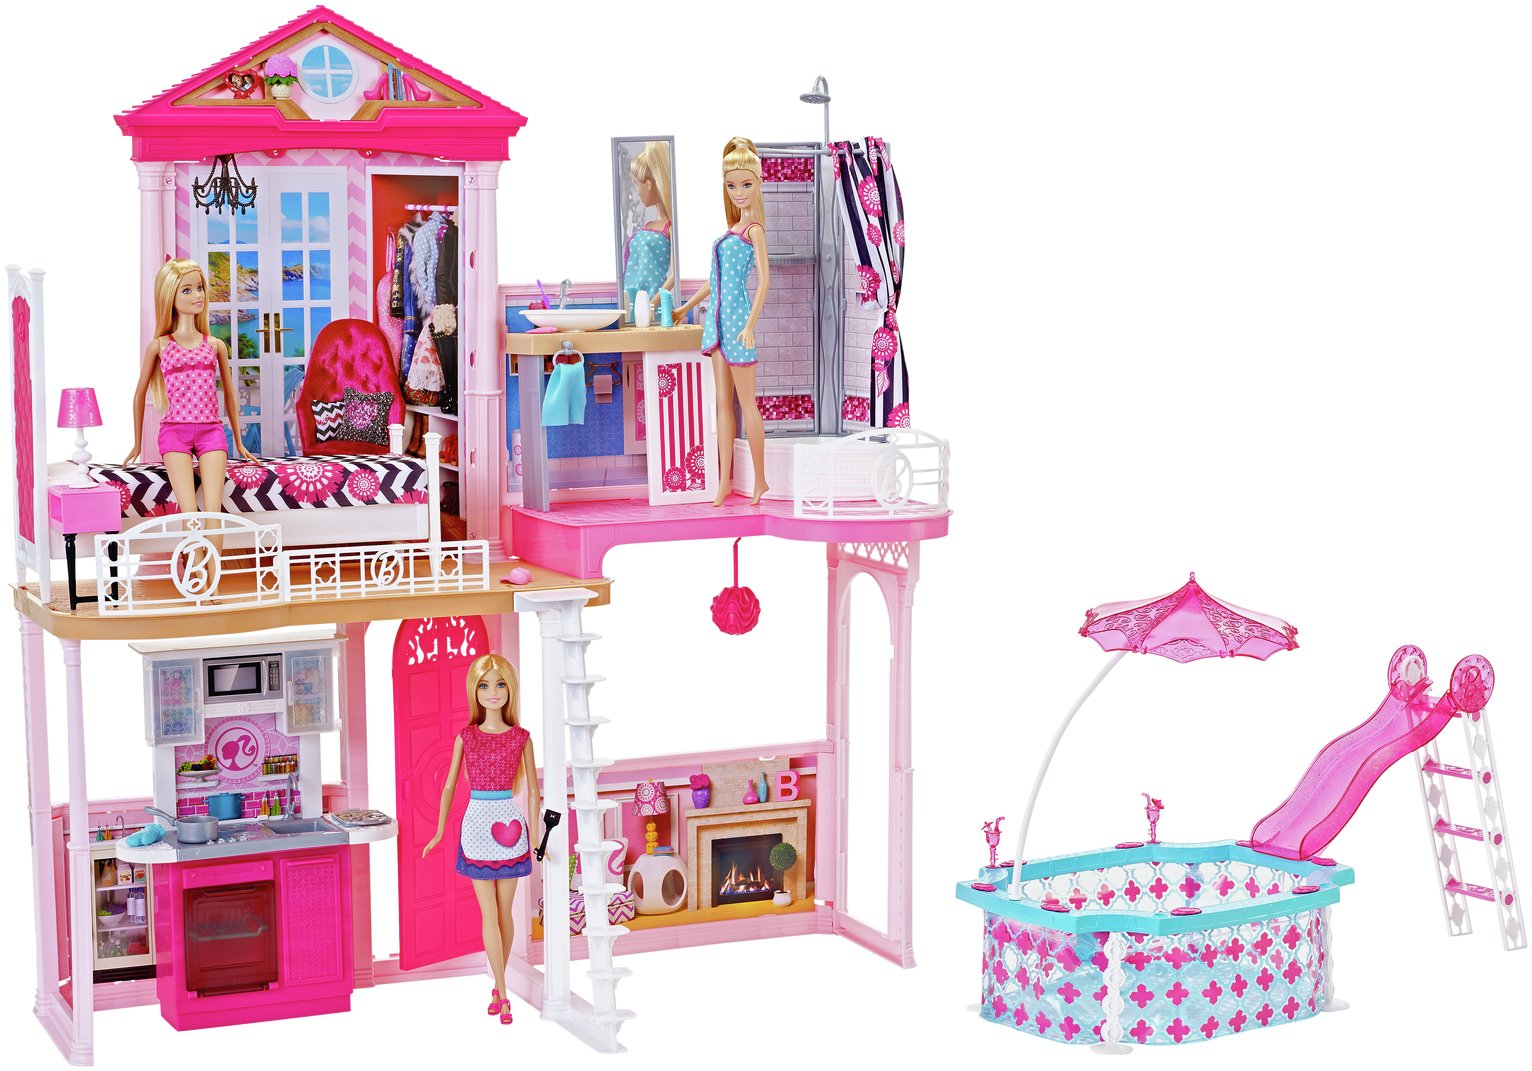 Complete Barbie Home Set with 3 Dolls and Pool